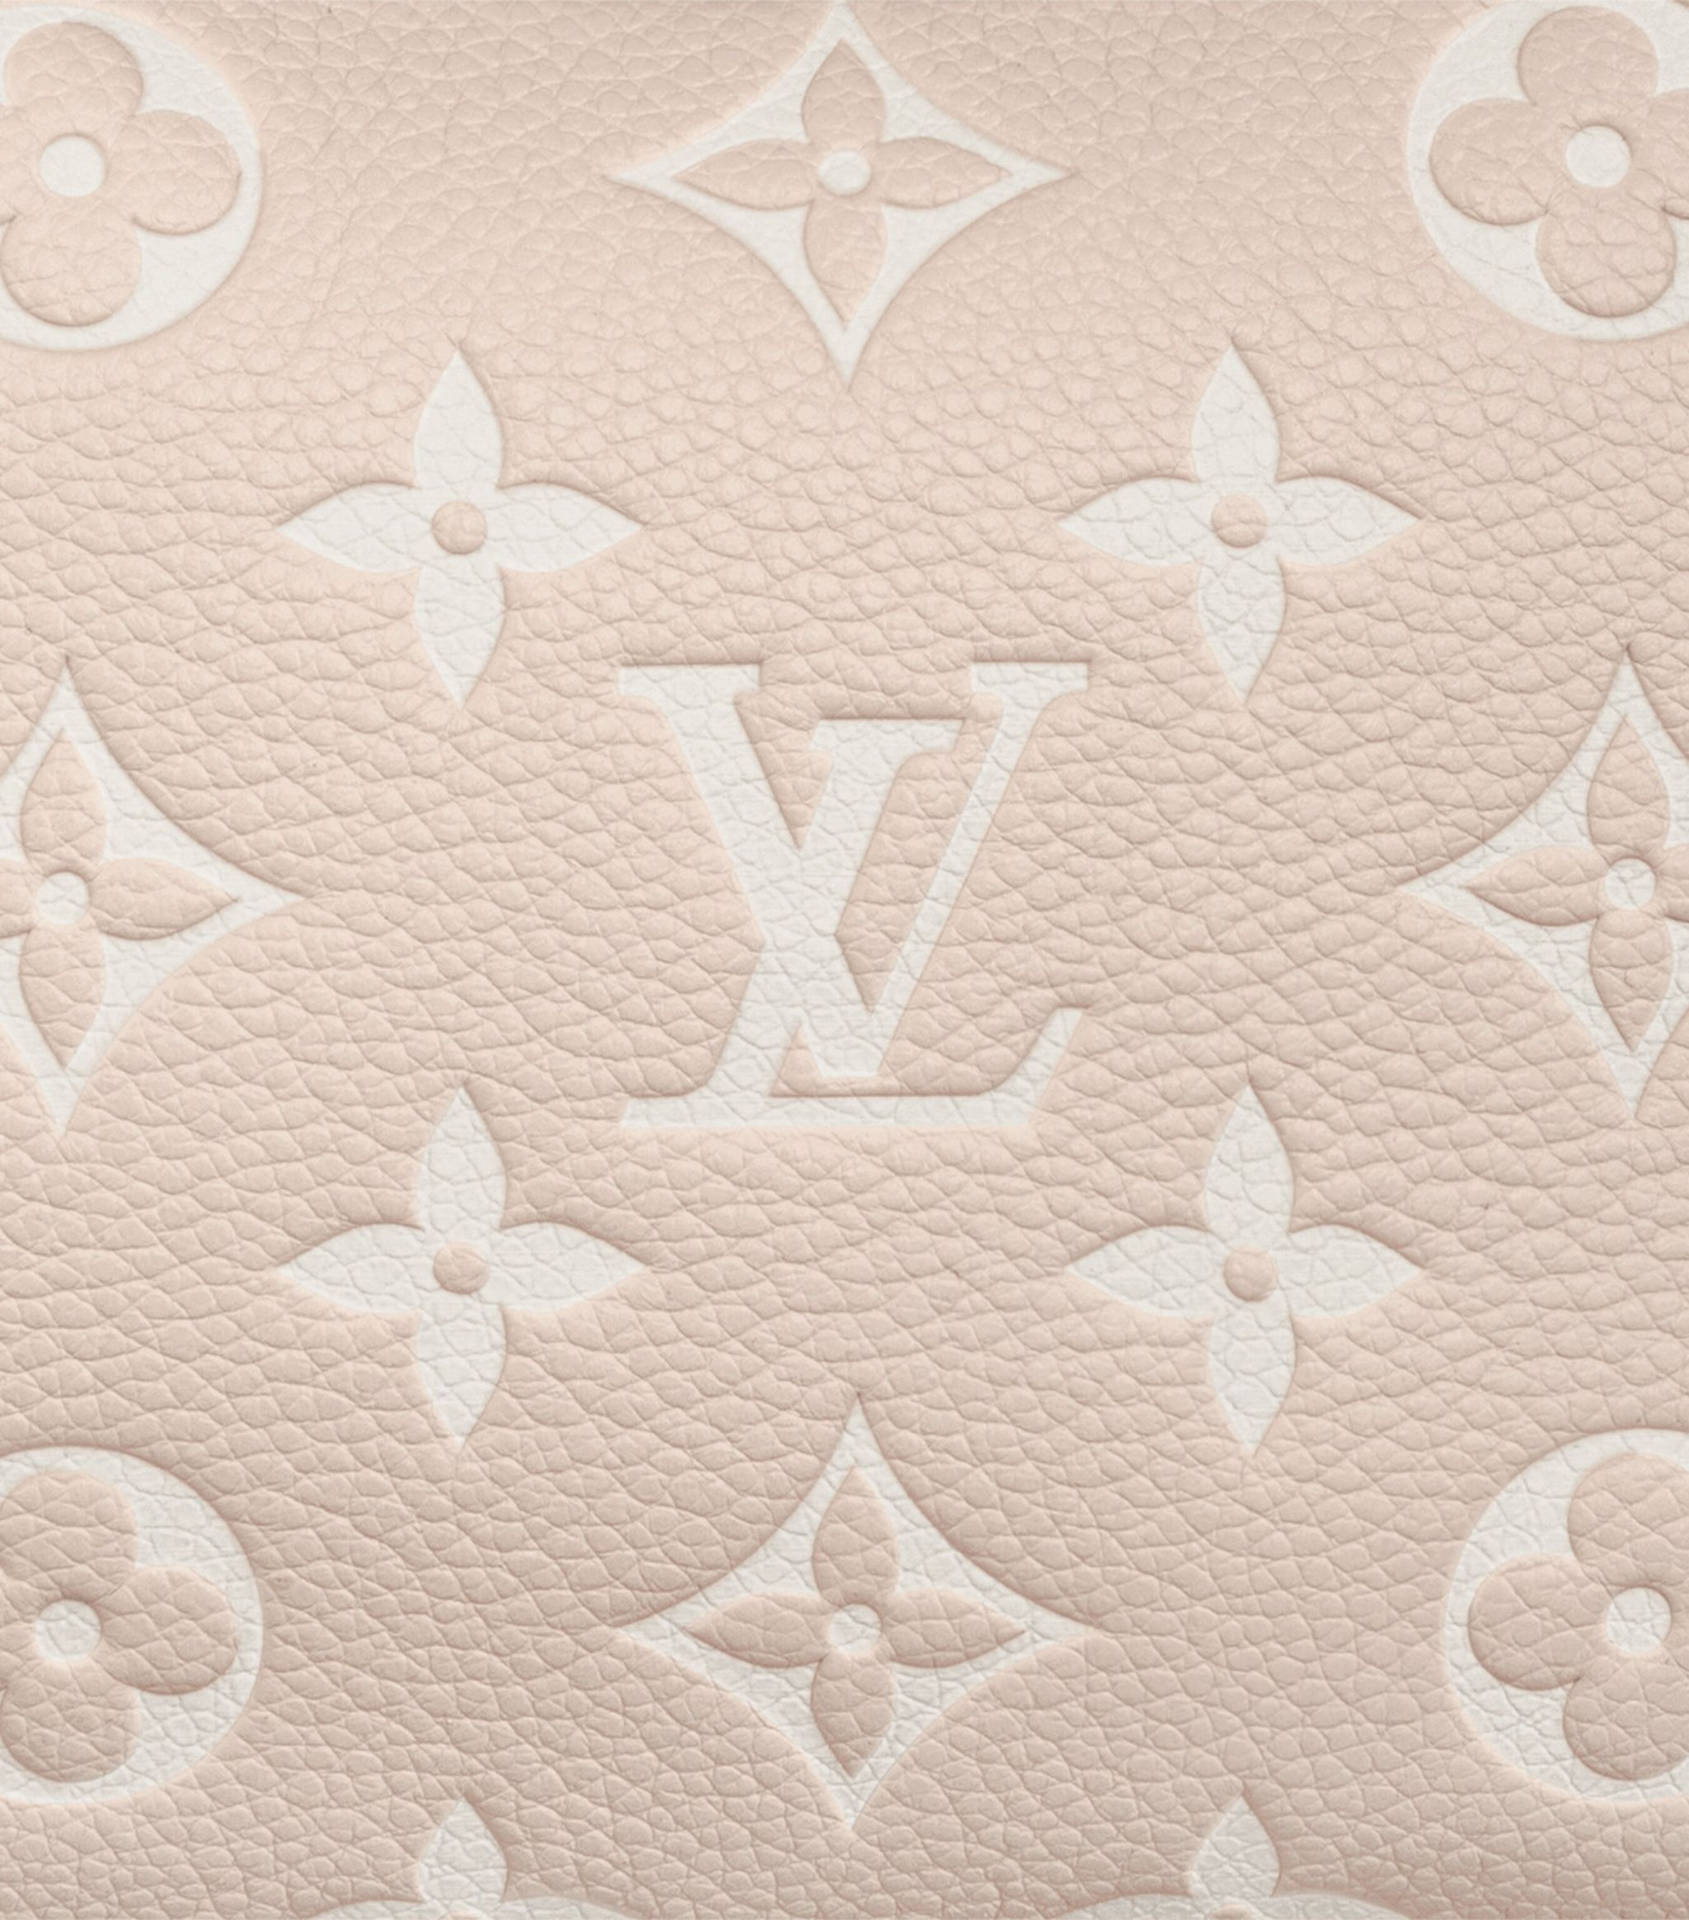 Download Stay stylish and sophisticated with Louis Vuitton